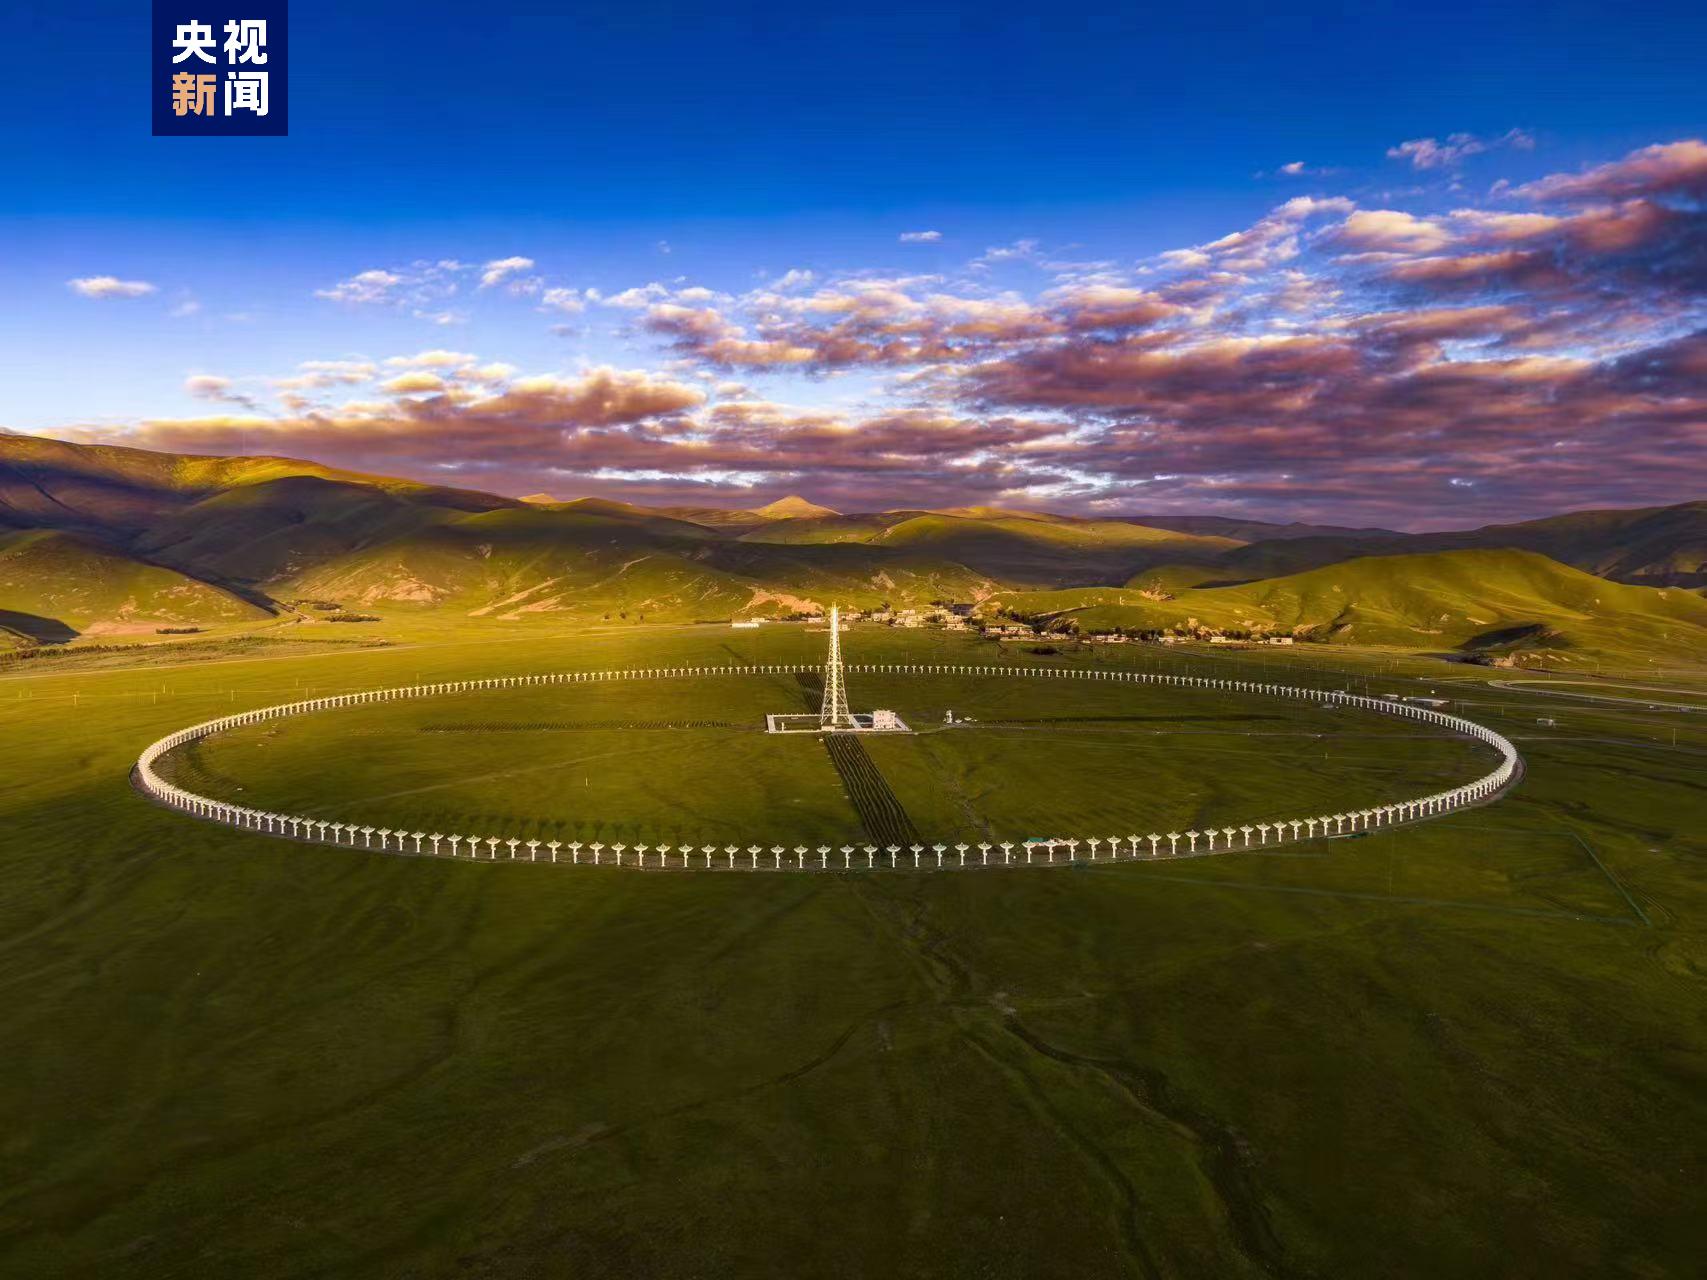 The Daocheng Solar Radio Telescope consists of 313 parabolic antennas, forming a large ring with a diameter of 1 kilometer. /China Media Group